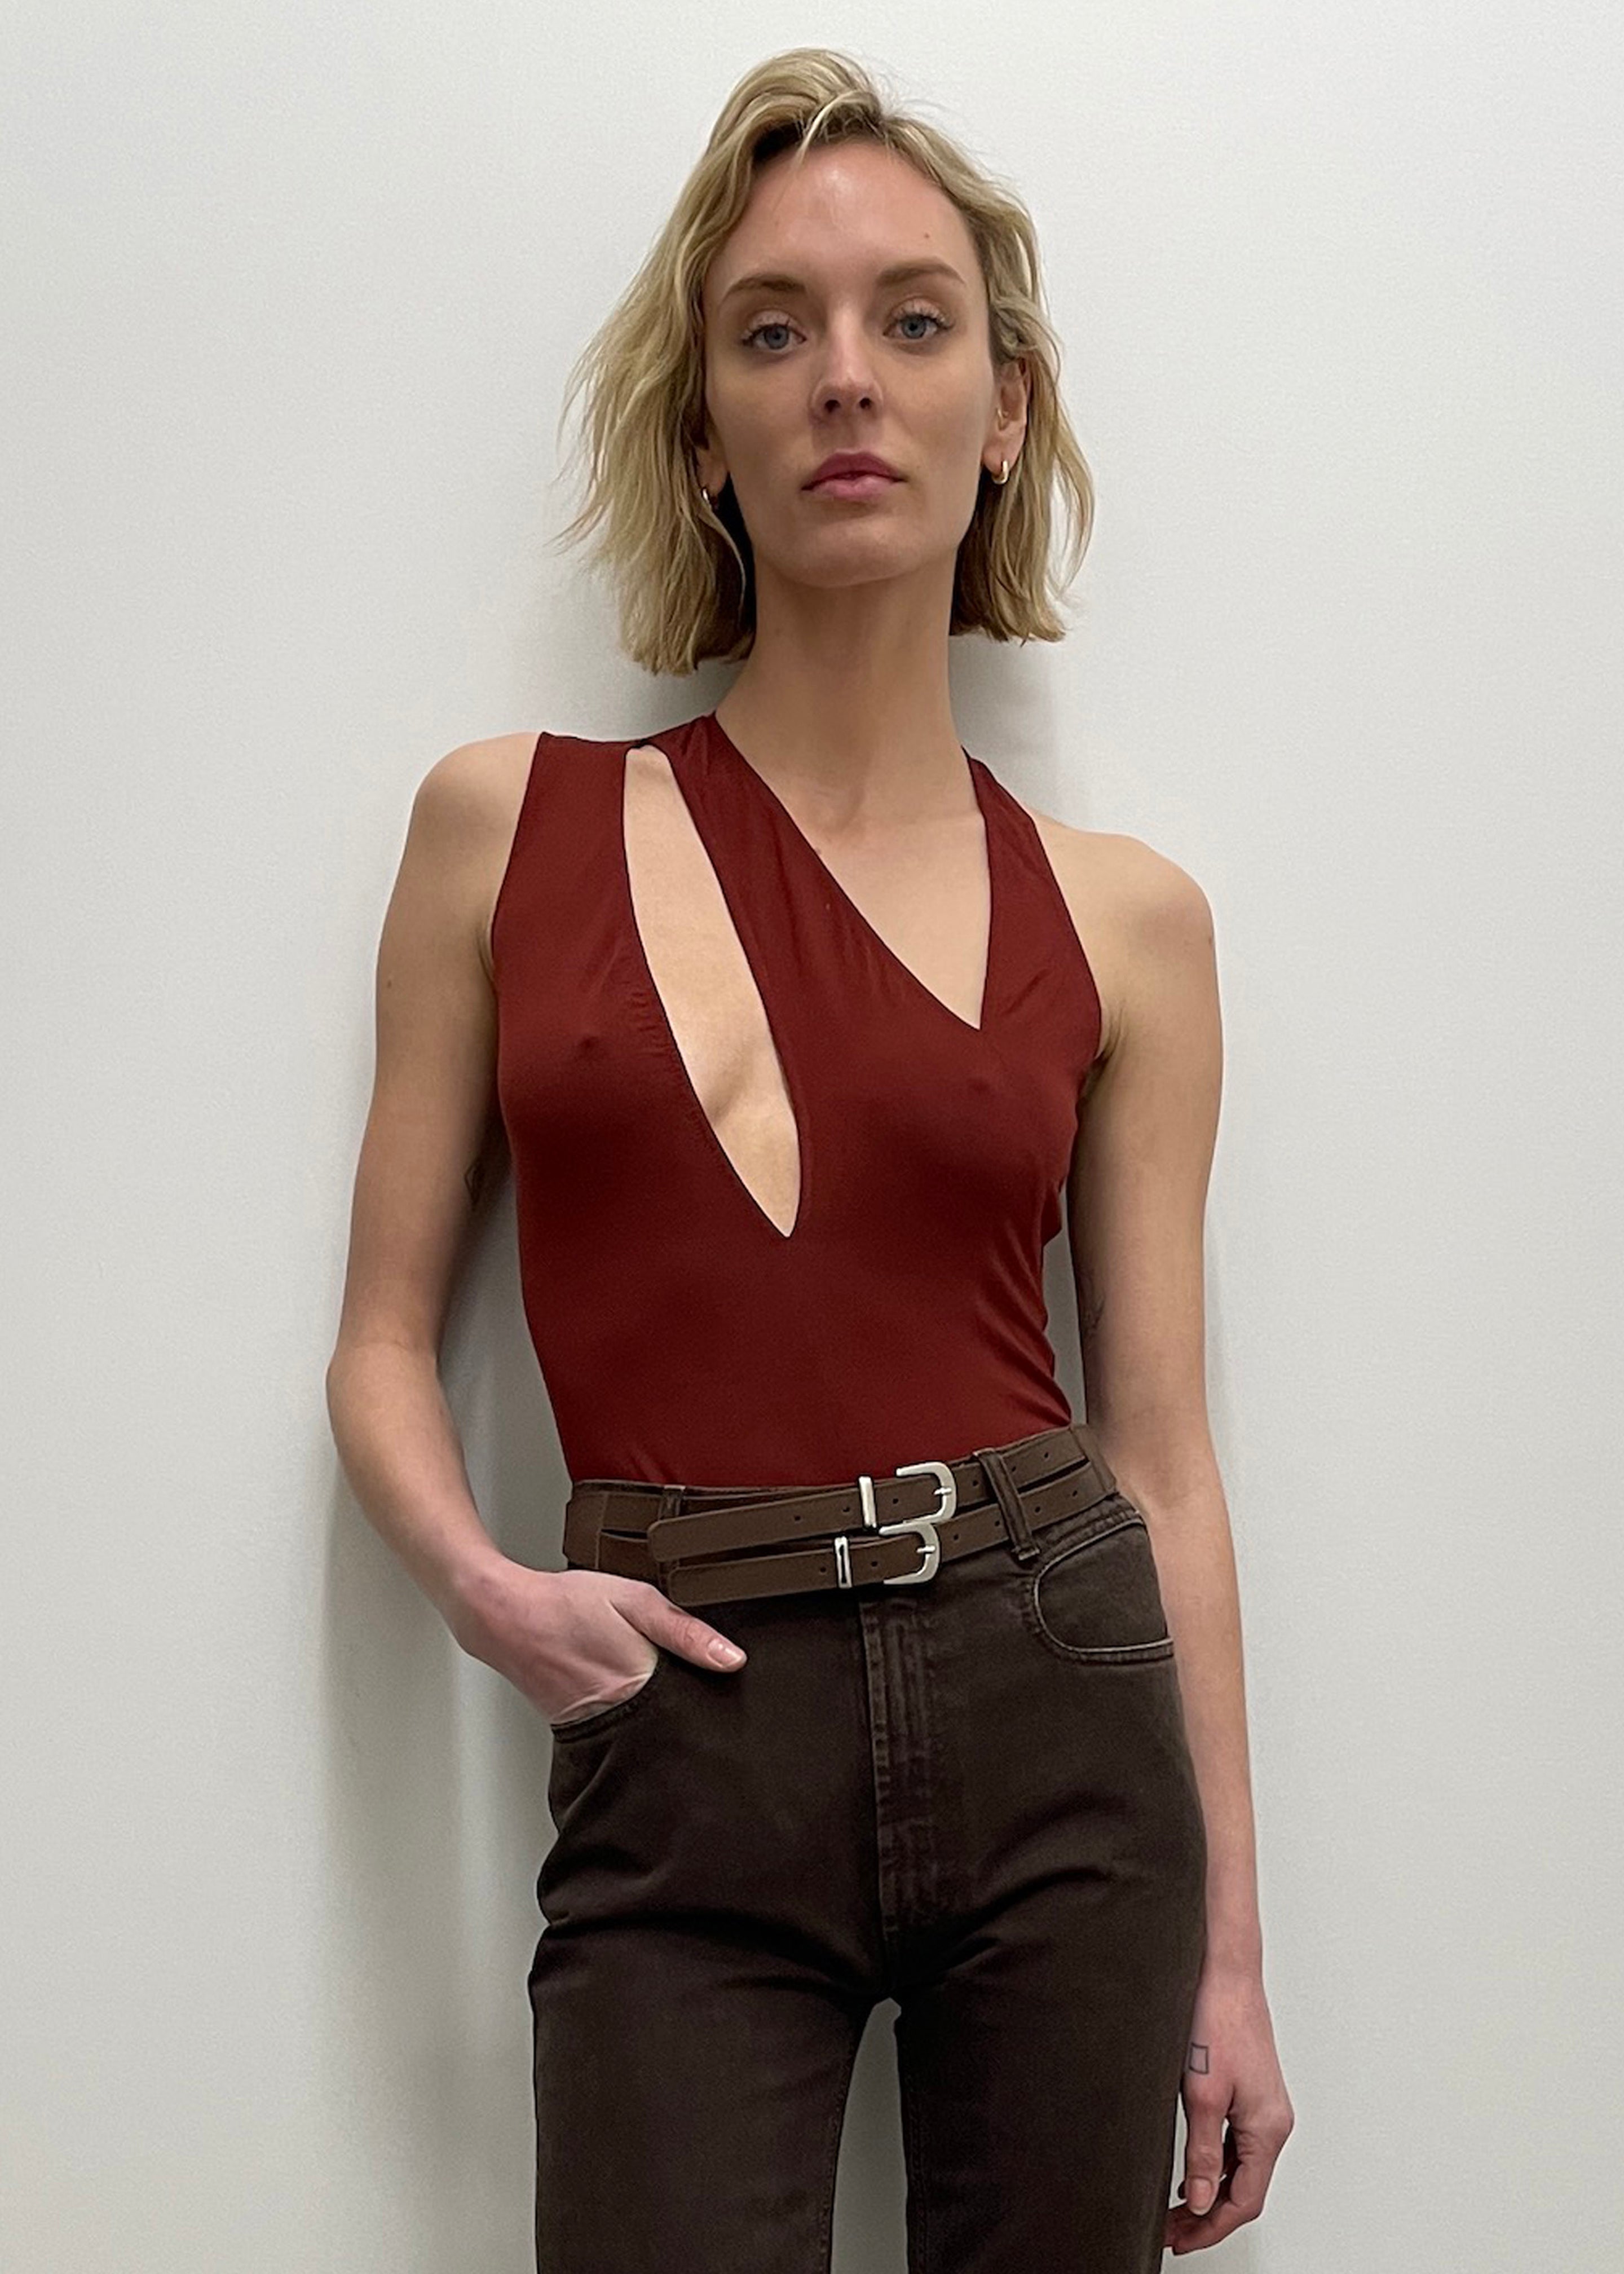 The Brooklyn Bodysuit: Square Neck Wide Strap Sleeveless